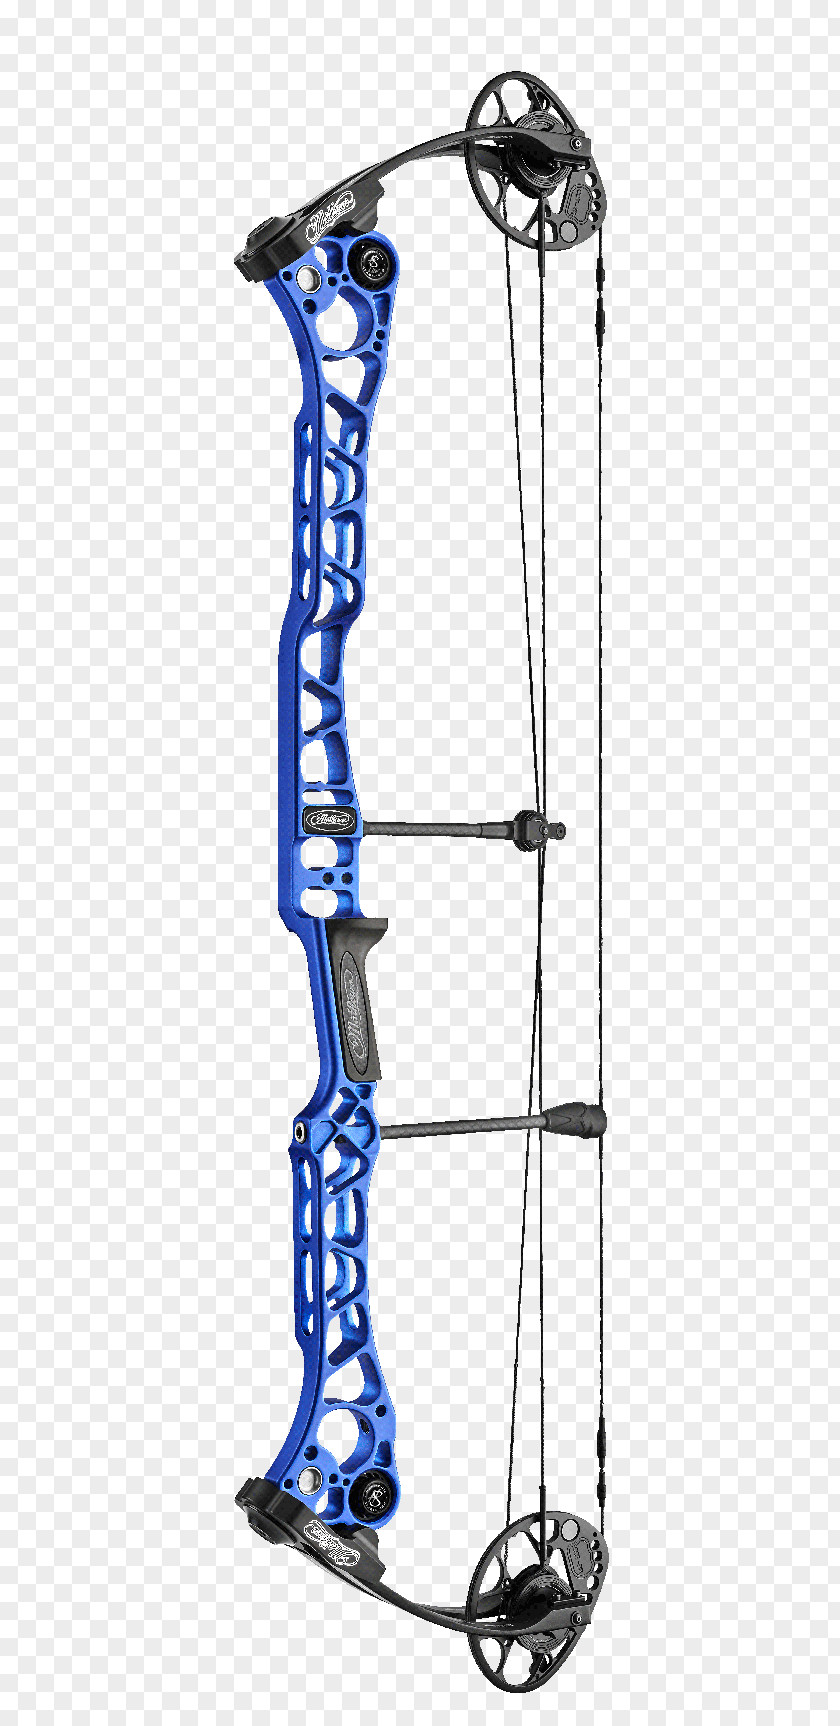 NEET Archery Equipment Compound Bows Bow And Arrow World Federation PNG